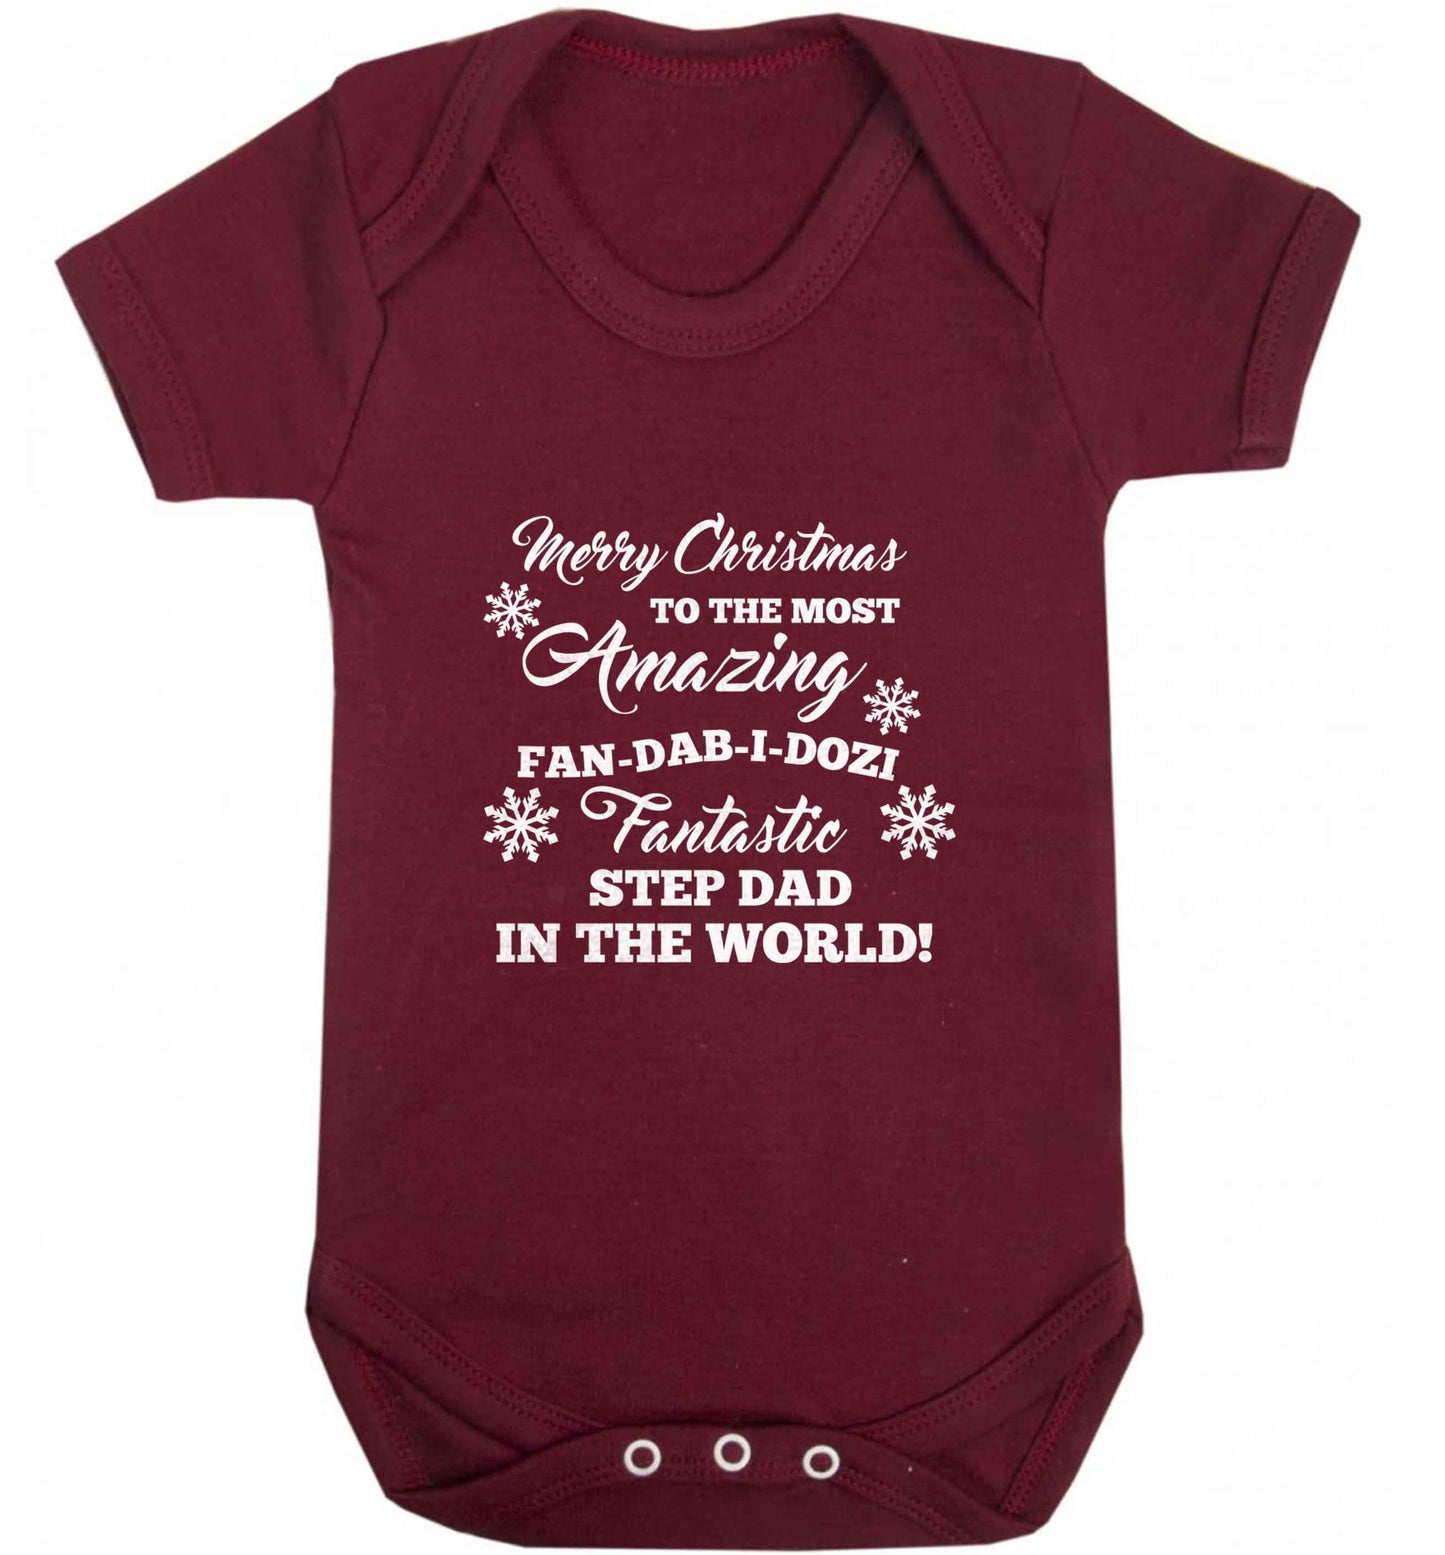 Merry Christmas to the most amazing fan-dab-i-dozi fantasic Step Dad in the world baby vest maroon 18-24 months